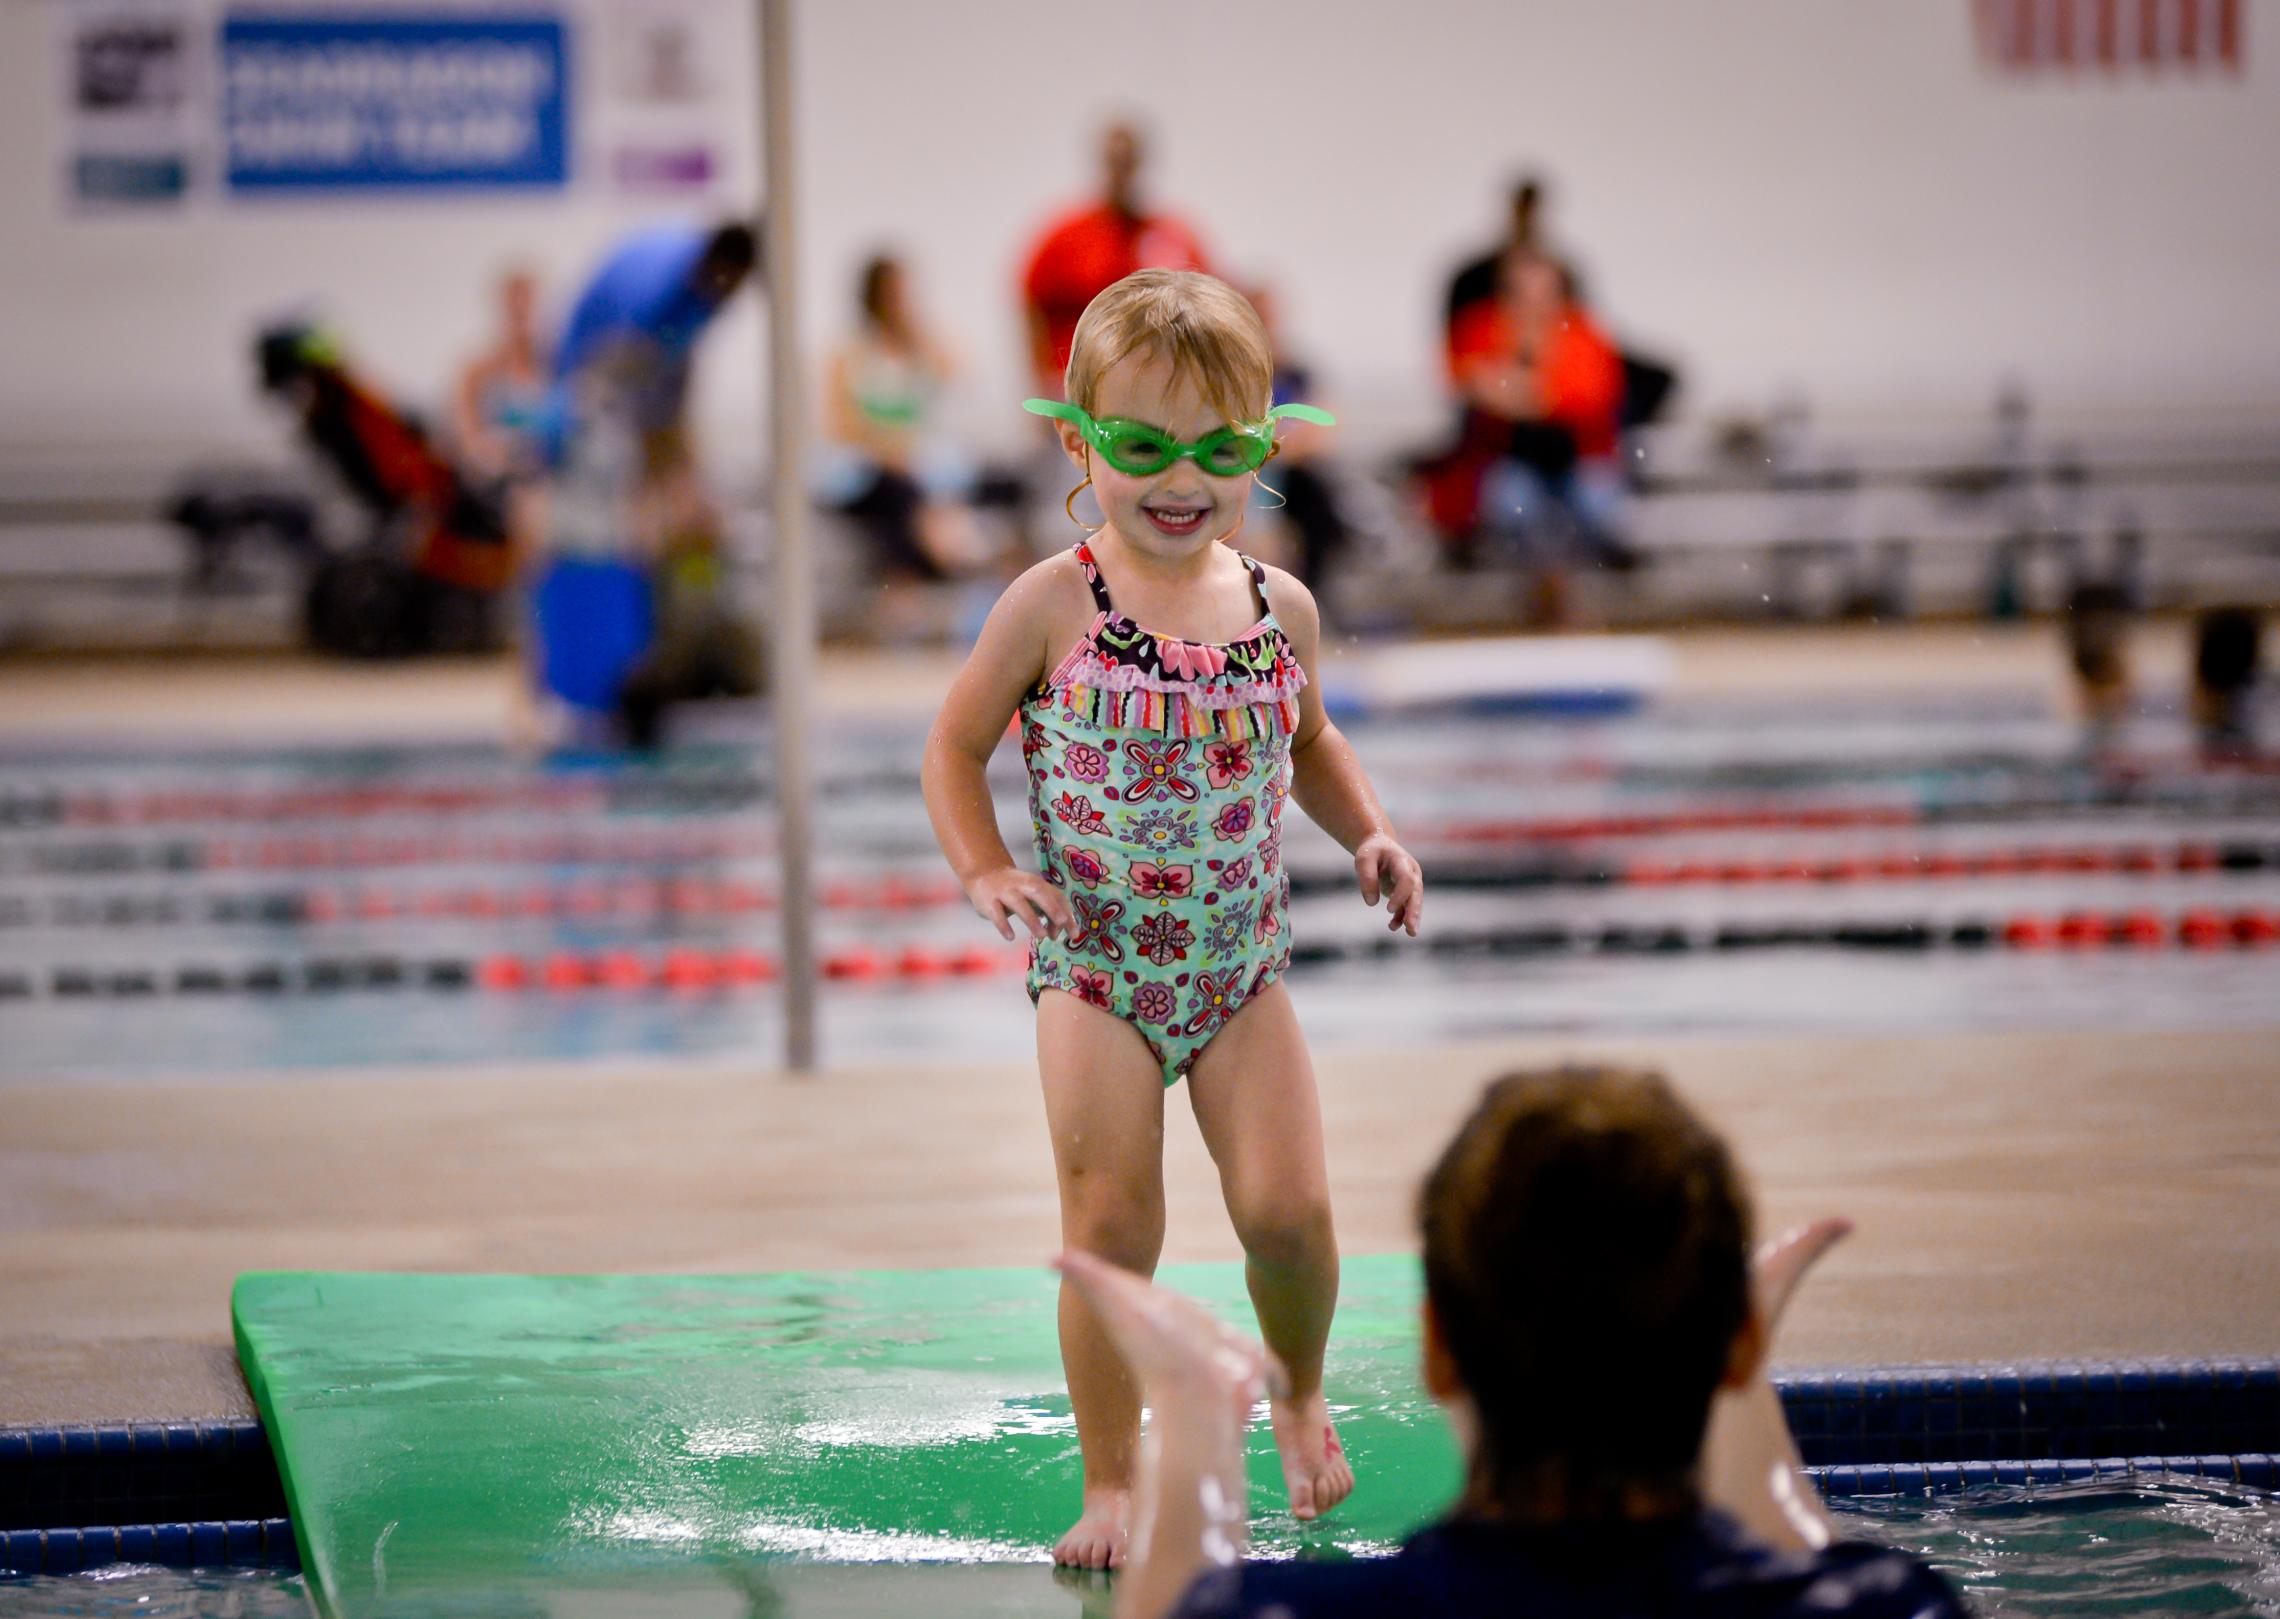 Toddler swim student jumps into the pool toward their instructor at the YMCA